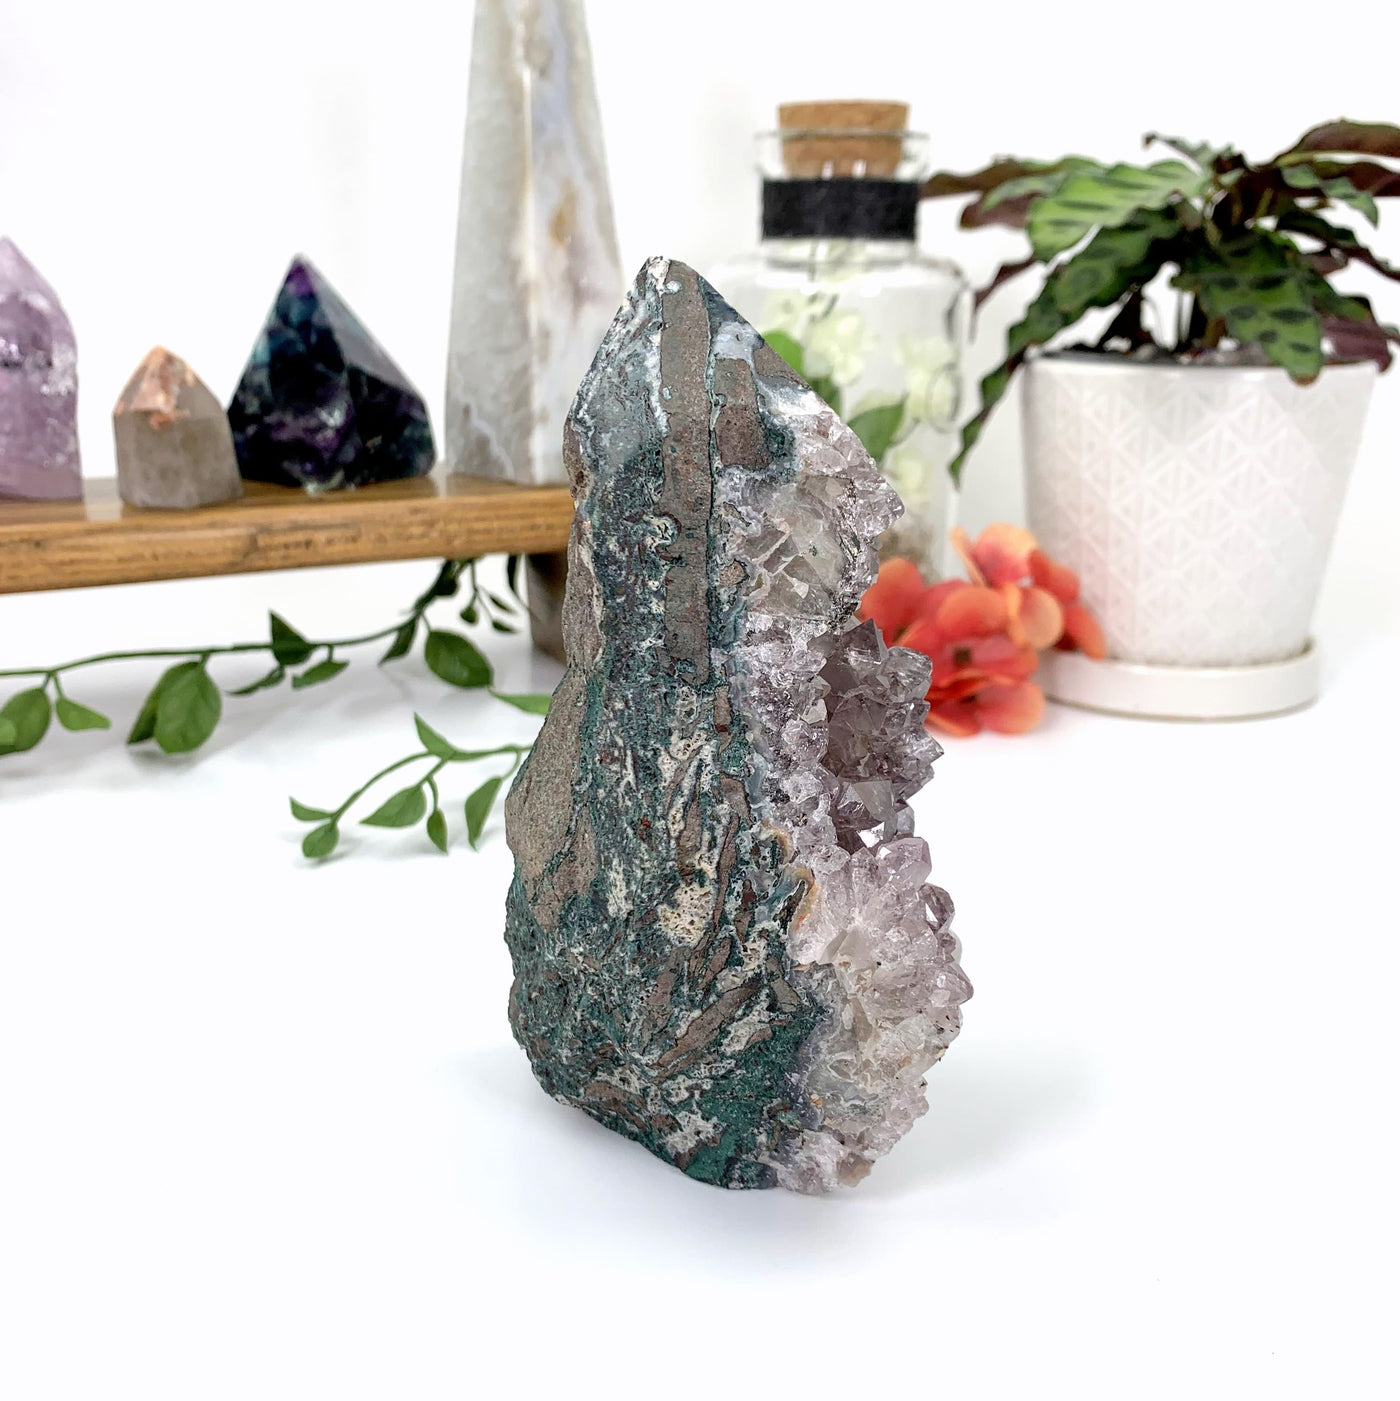 Amethyst cluster with a polished top to make it a point.  Flat at the bottom so it can stand on it's own.  Side view showing it is gray and green basalt on the side.